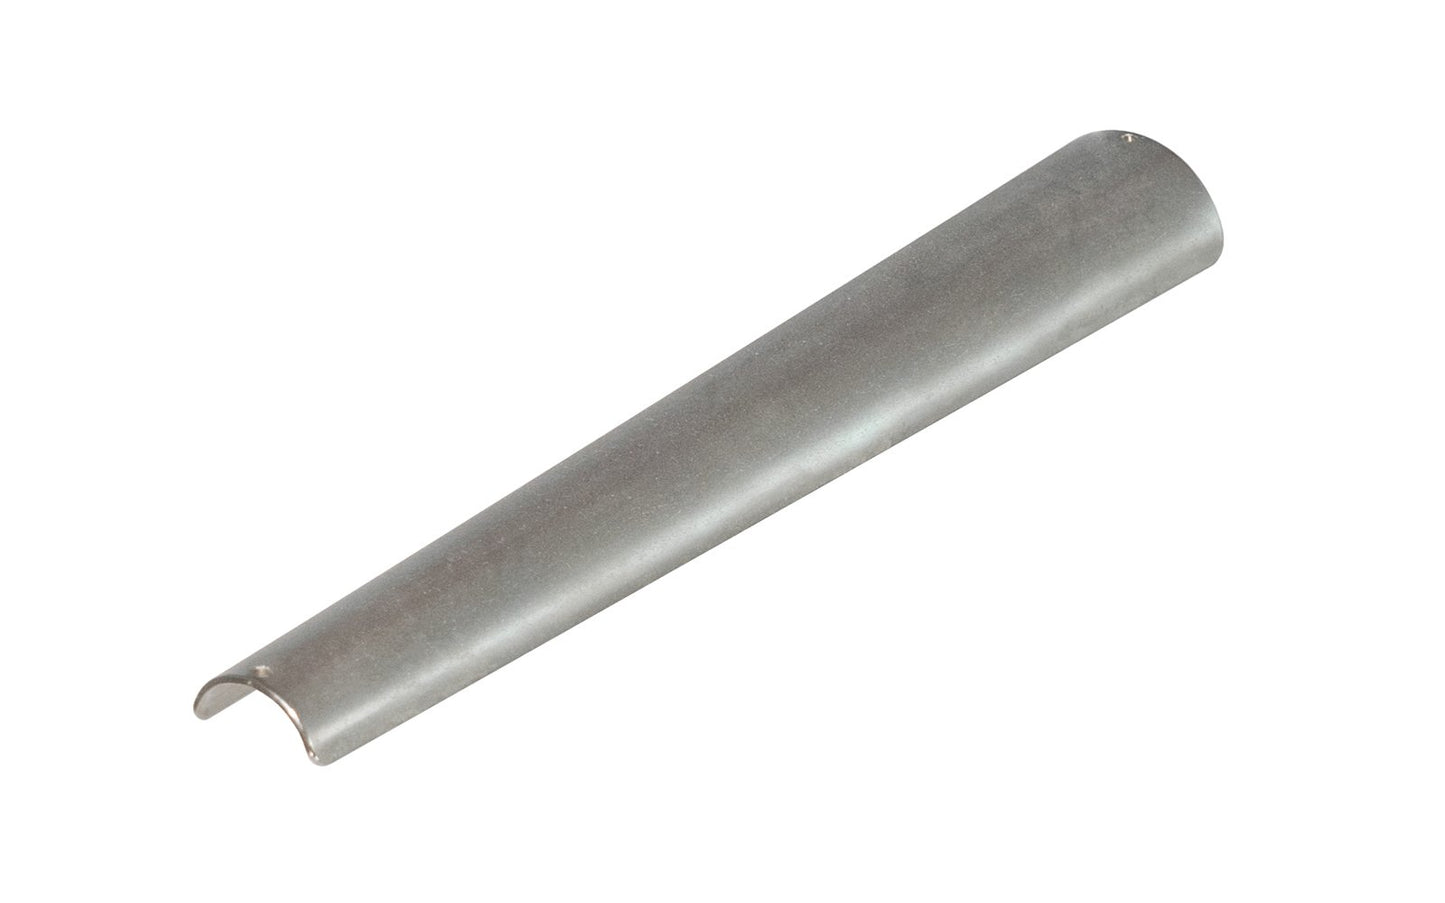 DMT Diamond Large Honing Cone ~ Fine - DCLF - Made in USA ~ Excellent for working gouges, wood turning, tool & die work -Diamond Honing Tapered Cone - Large Size - Blade width tapers from the base 3/4" to 1-1/4" diameter - Half Round 